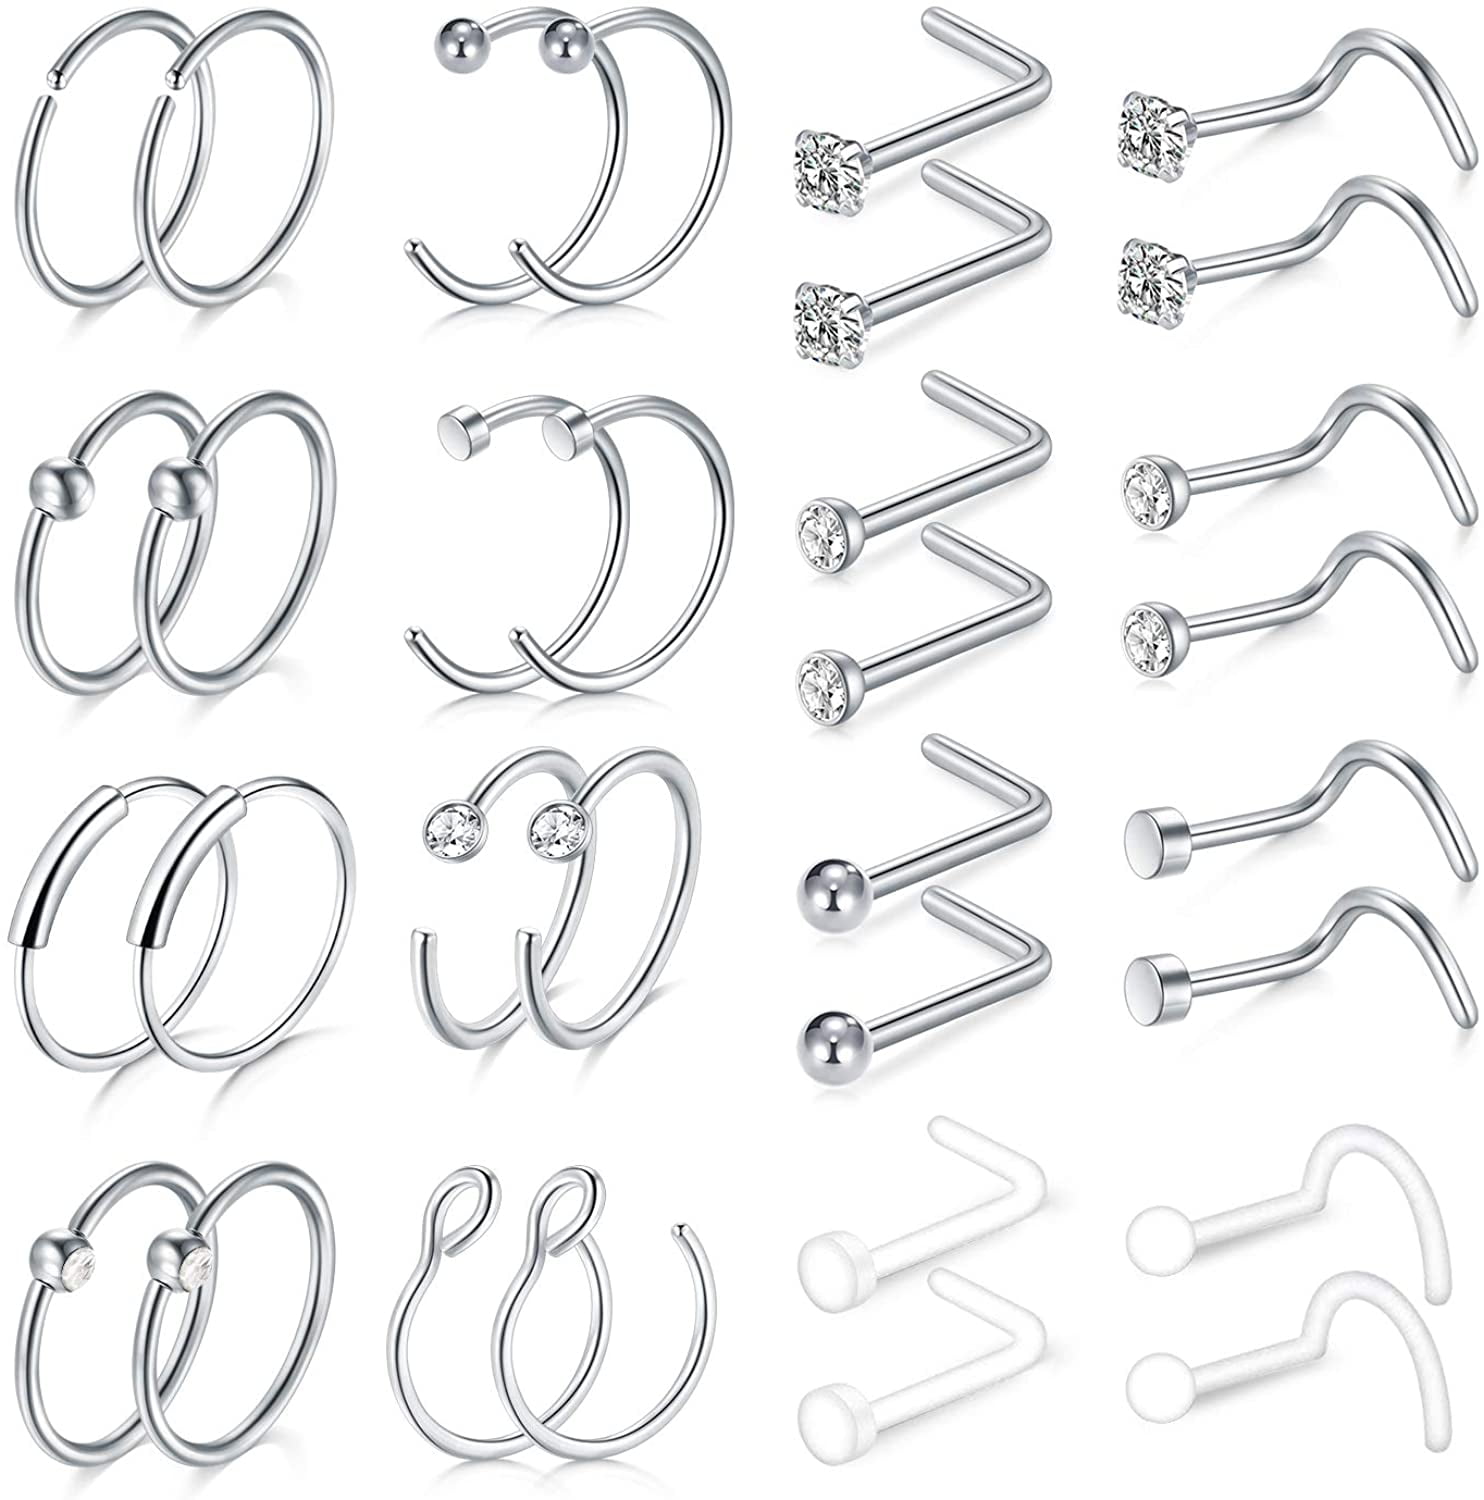 QWALIT 20g 18g Nose Rings Studs Surgical Steel L Shaped Nose Screw Nostril Piercing Jewelry Opal CZ Tragus Helix Cartilage Earrings Flat and Round Top for Women Men 